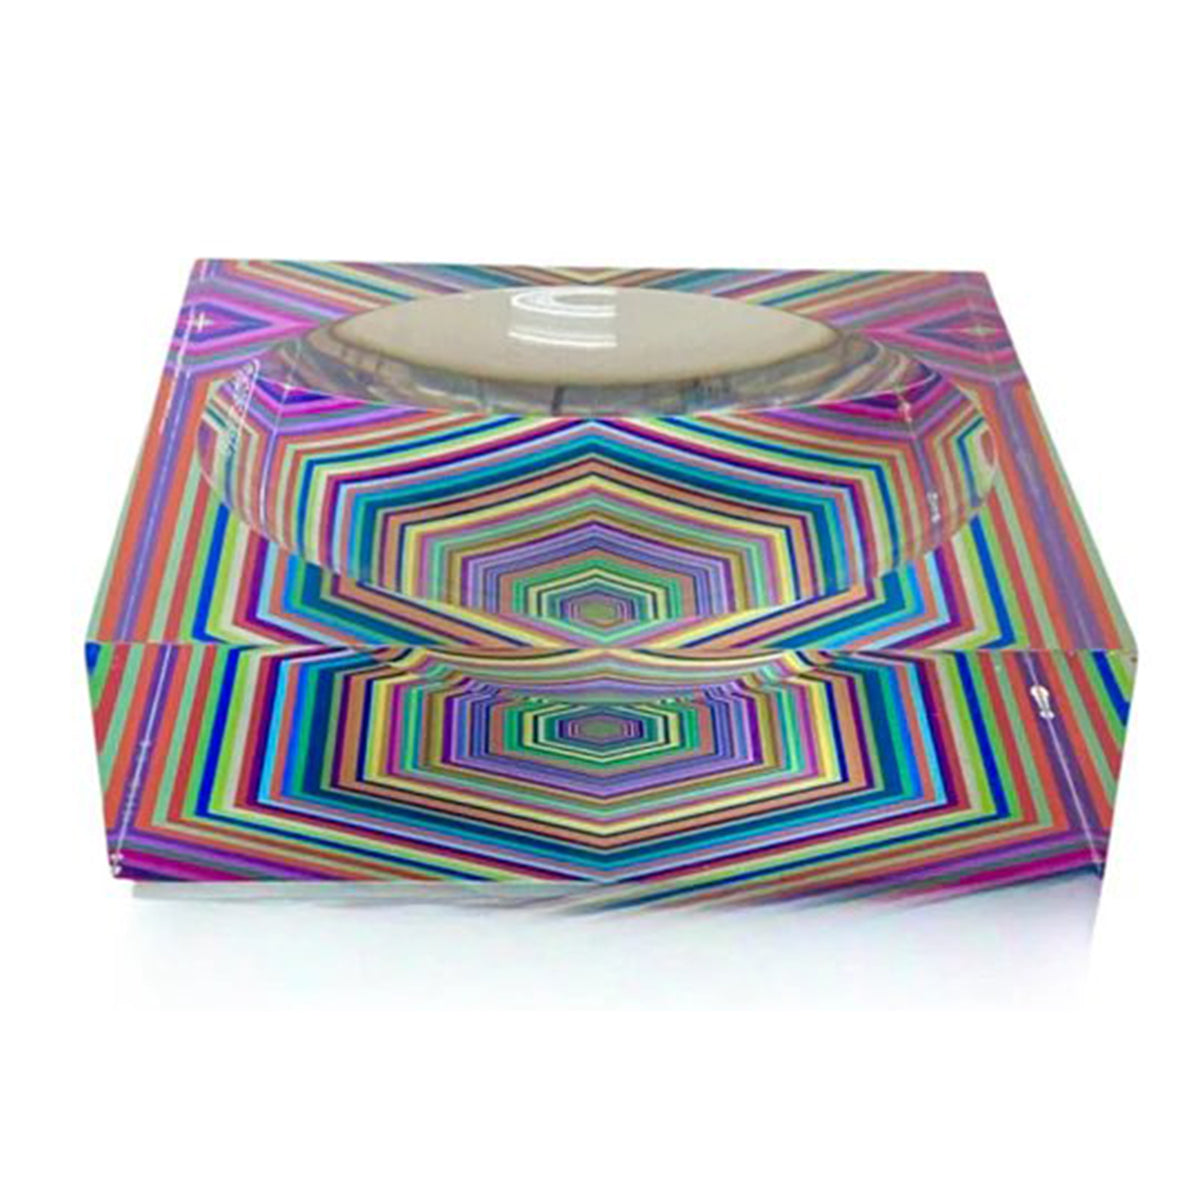 Nicolette Mayer Hex Dylan Acrylic Candy Tray 6x6